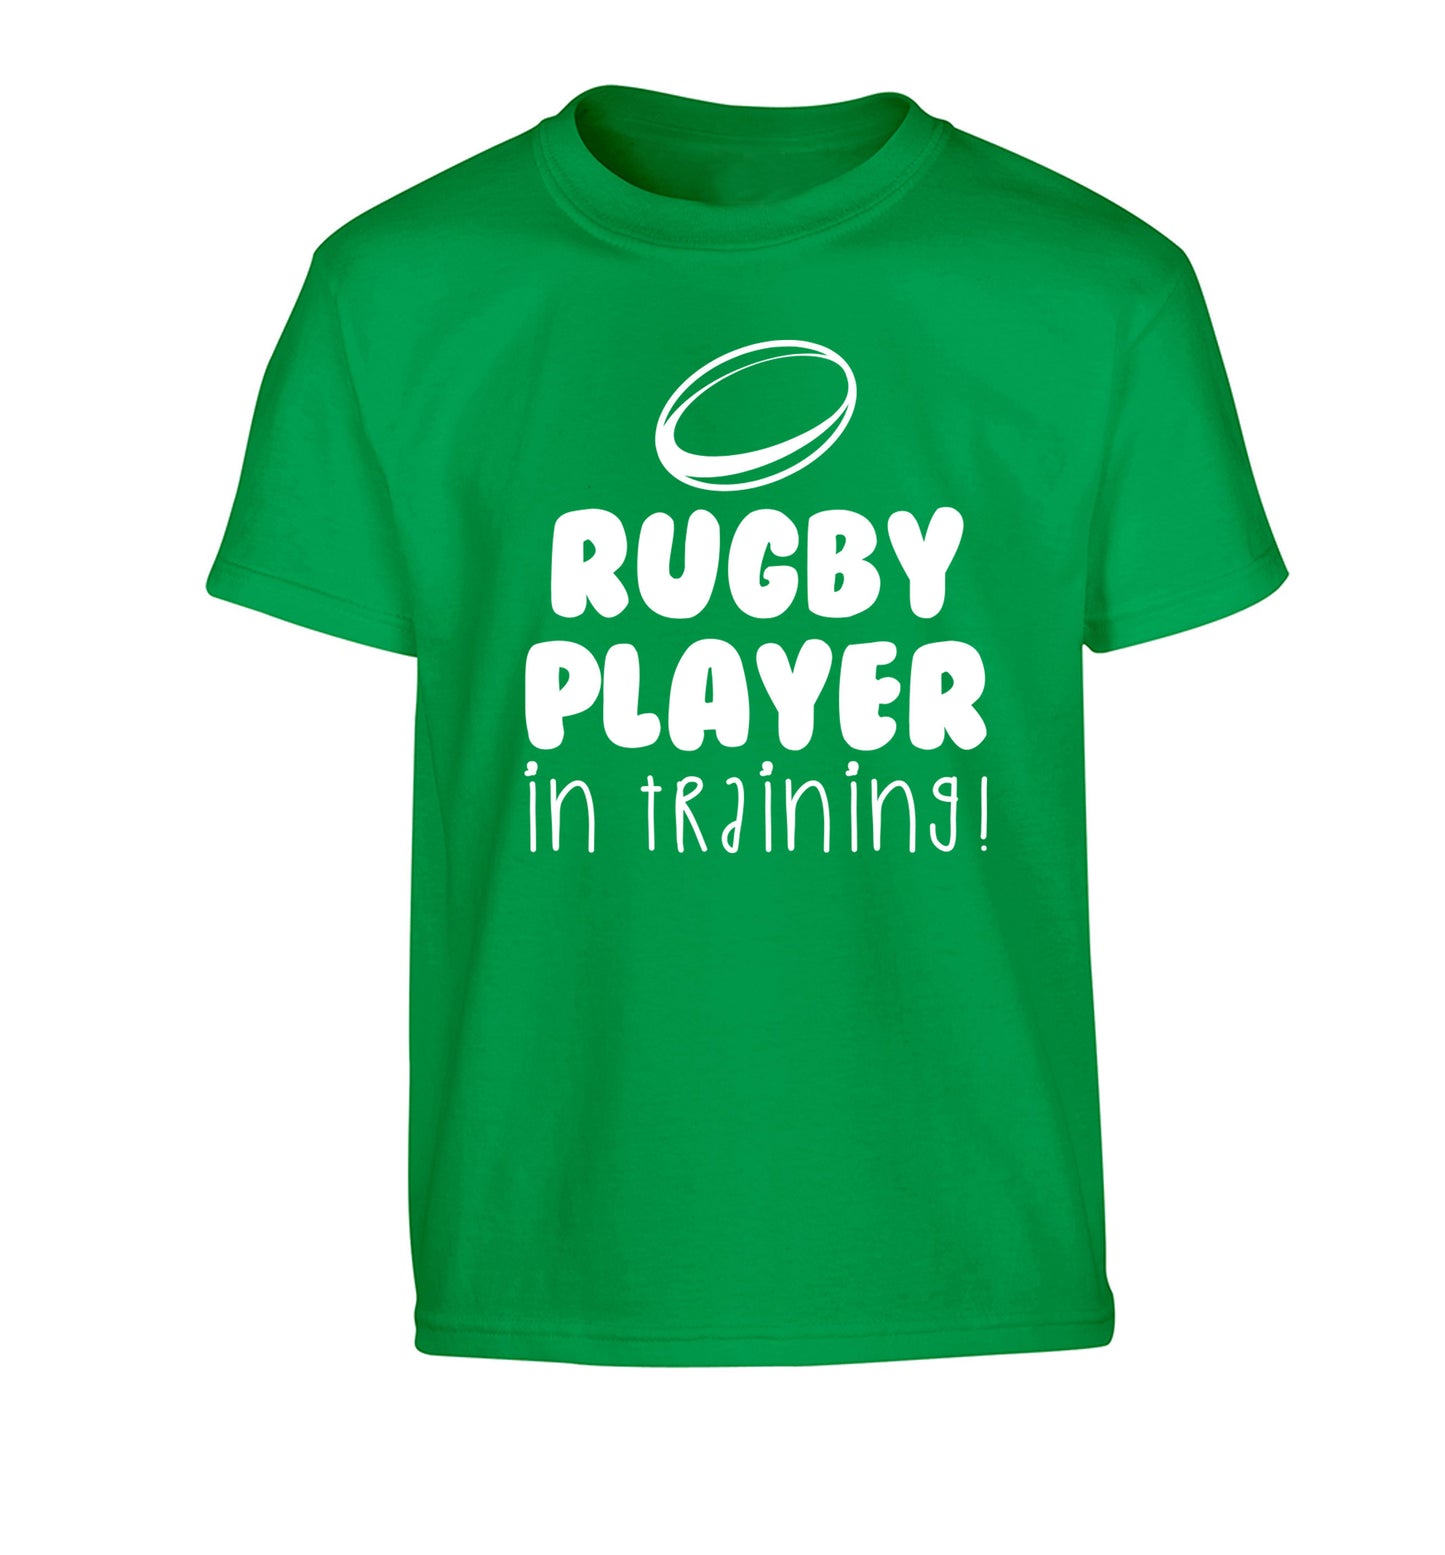 Rugby player in training Children's green Tshirt 12-14 Years